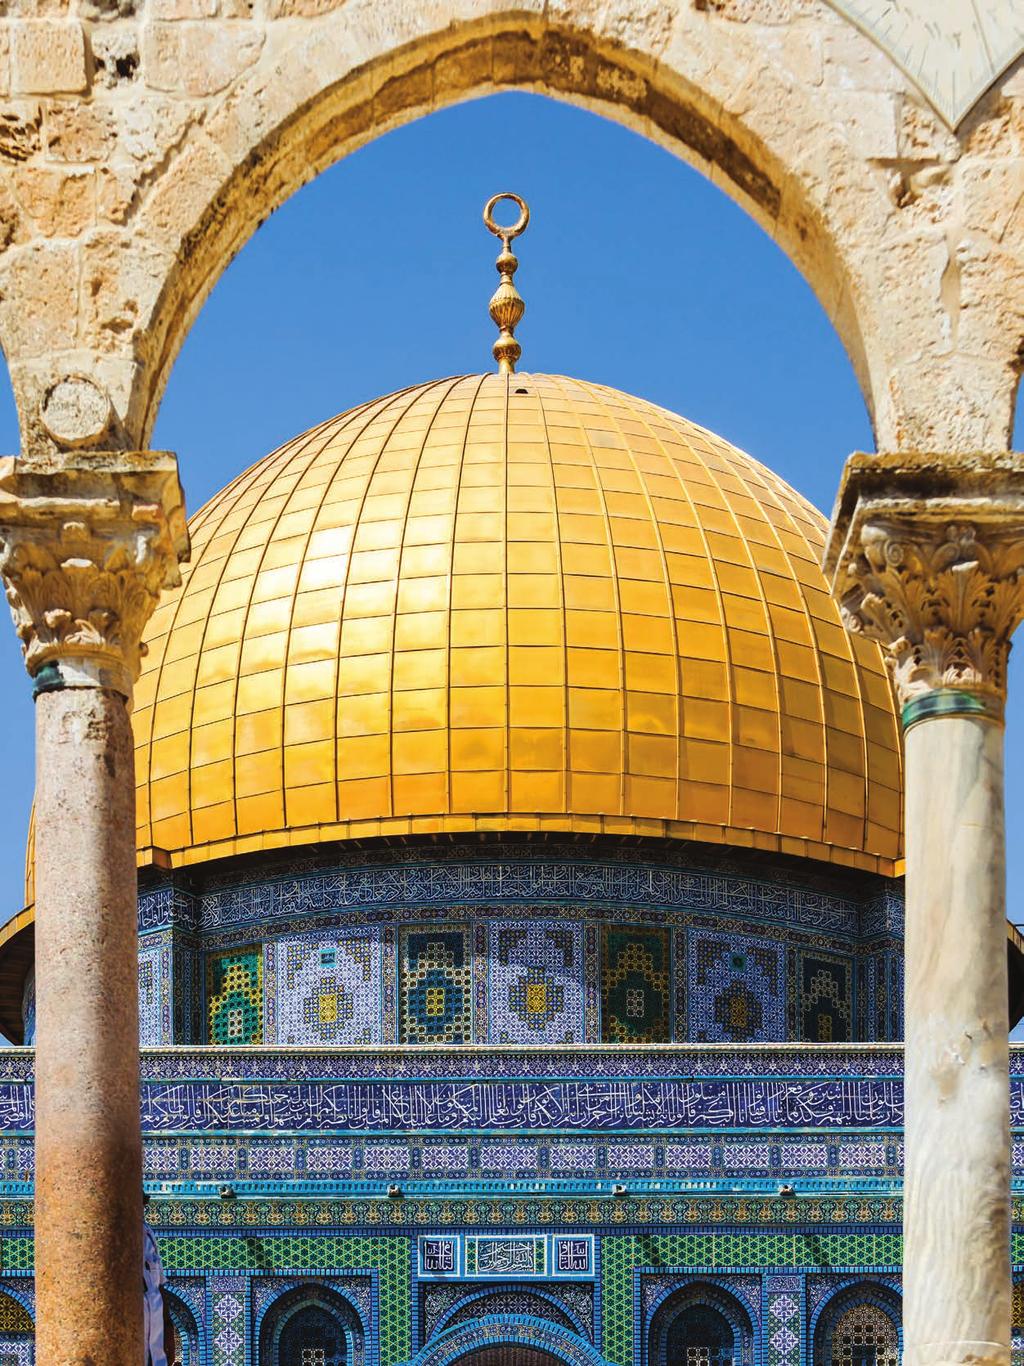 L A N D OF T H E G OD S DAYS COUNTRIES MEALS FROM A$495pp* TAKE A PILGRIMAGE TO THE LAND WHERE IT ALL BEGAN, WALK WHERE JESUS WALKED, TAKE A CRUISE ON THE SEA OF GALILEE.